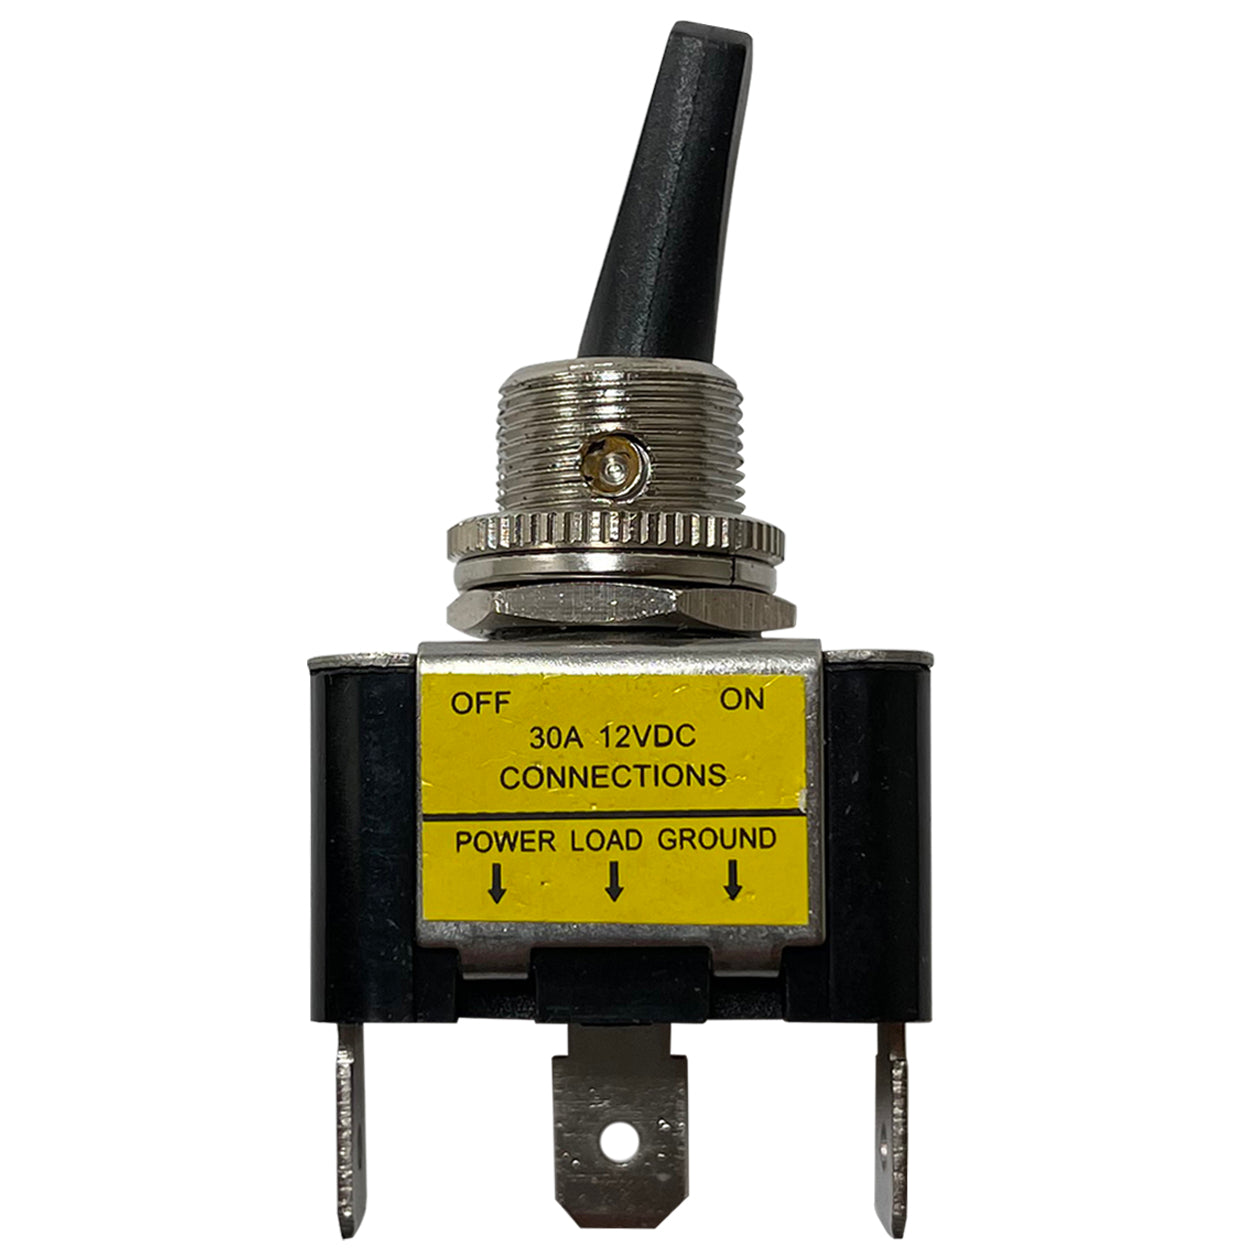 Amber Heavy Duty LED Illuminated ON / OFF Metal Toggle Switch SPST - 30 Amps @ 12 Volts